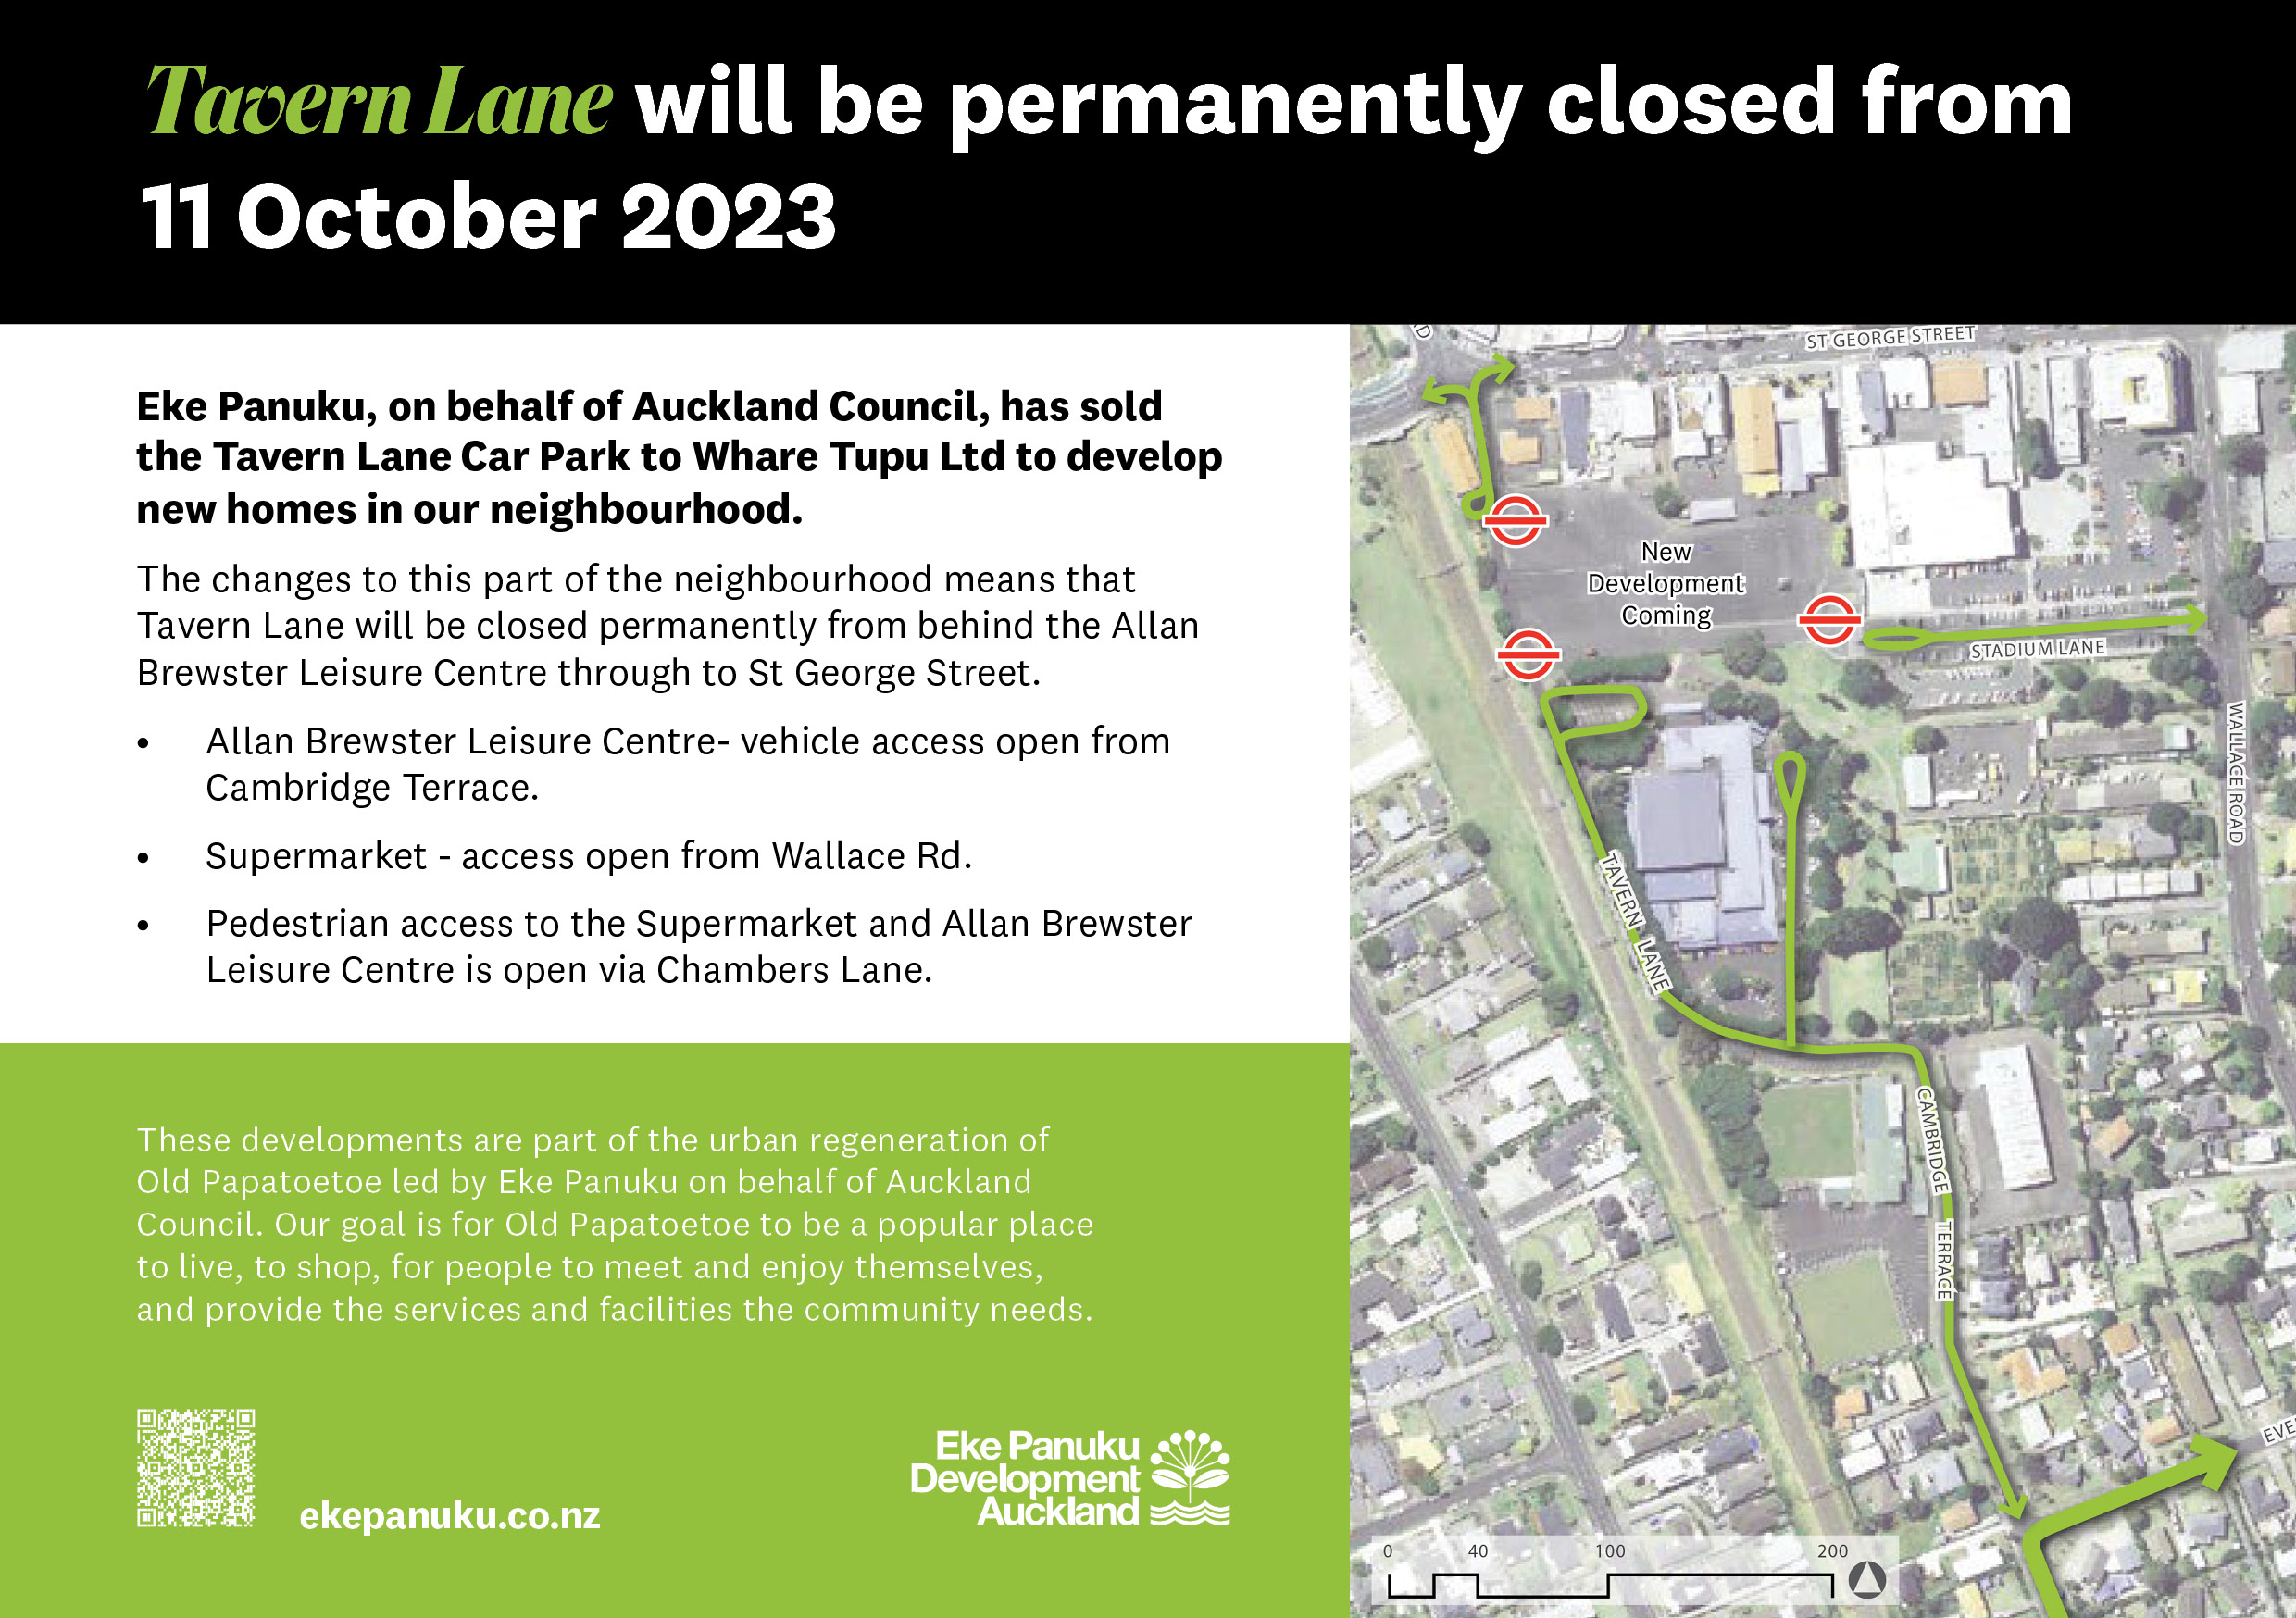 Meanwhile, construction is about to start on Tavern Lane, which will be closed throughout the duration of the work.